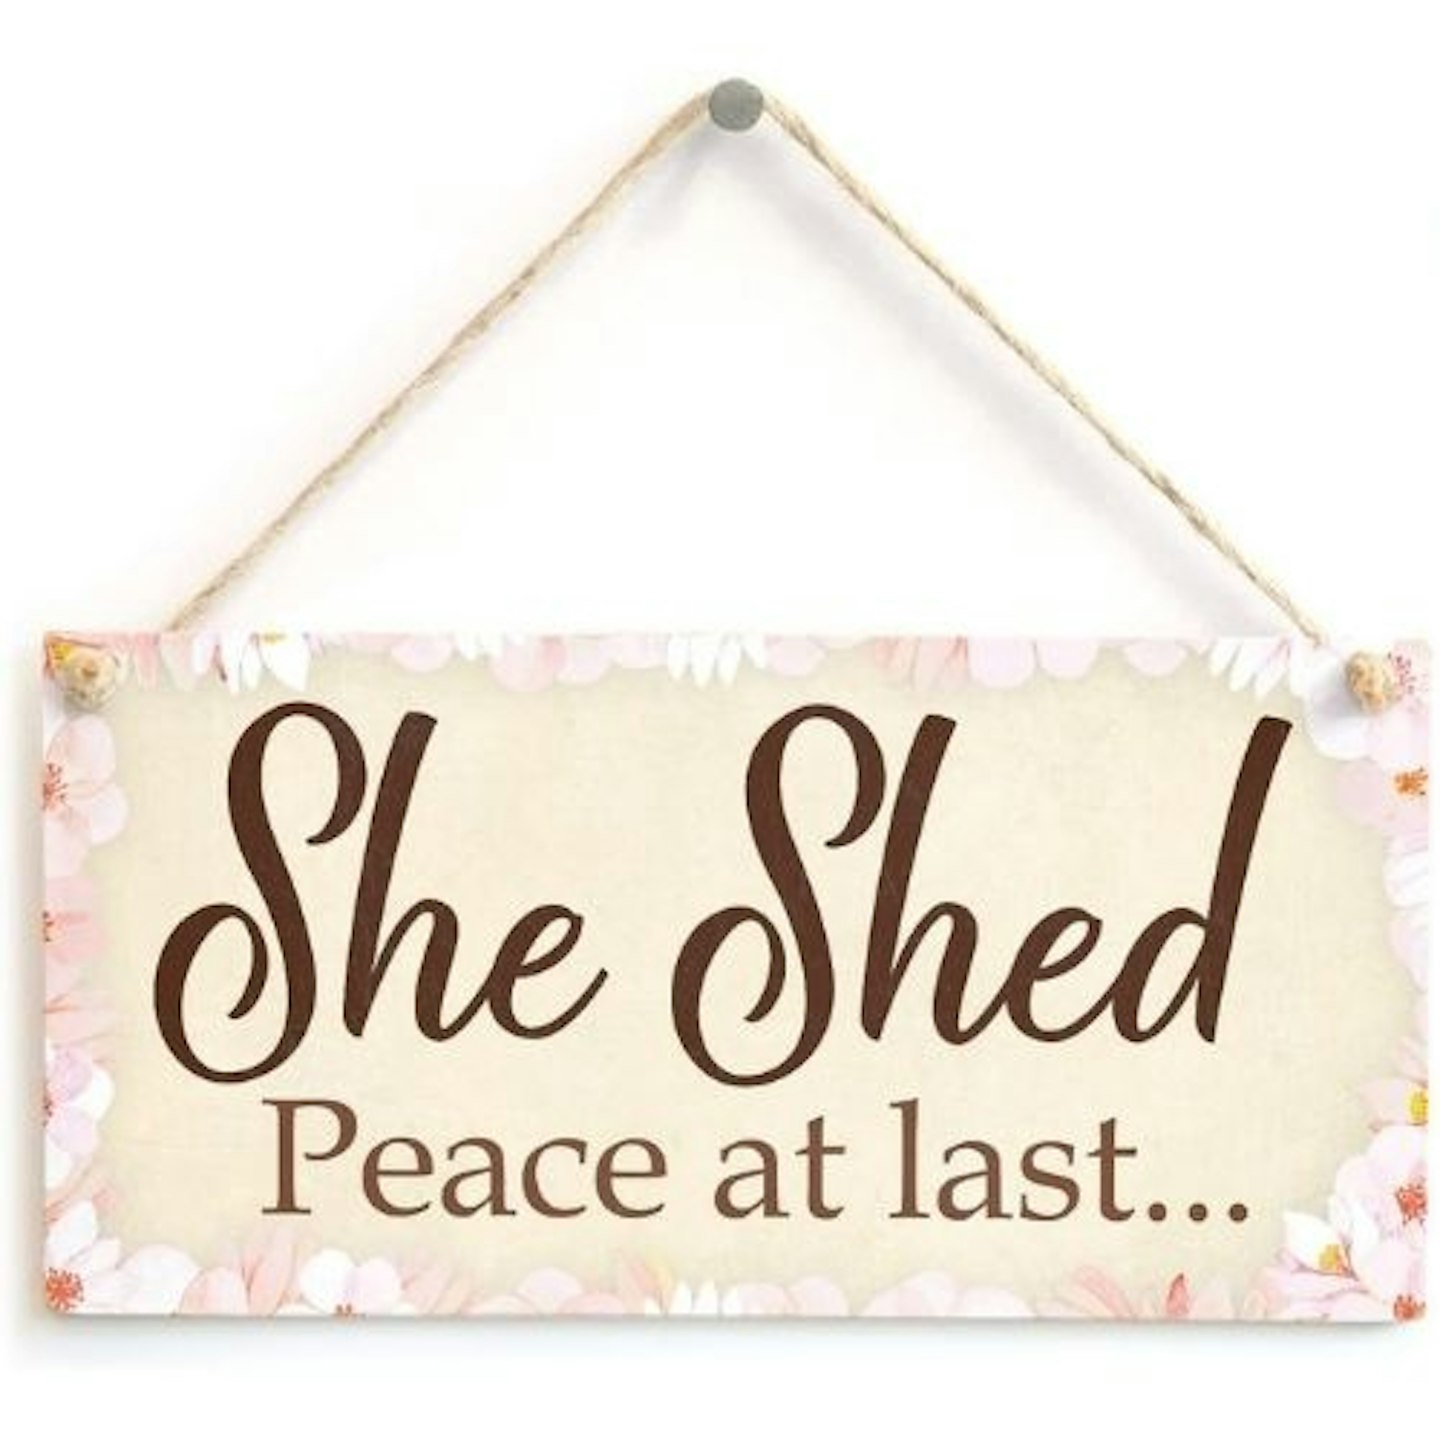 She Shed Peace at Last Sign